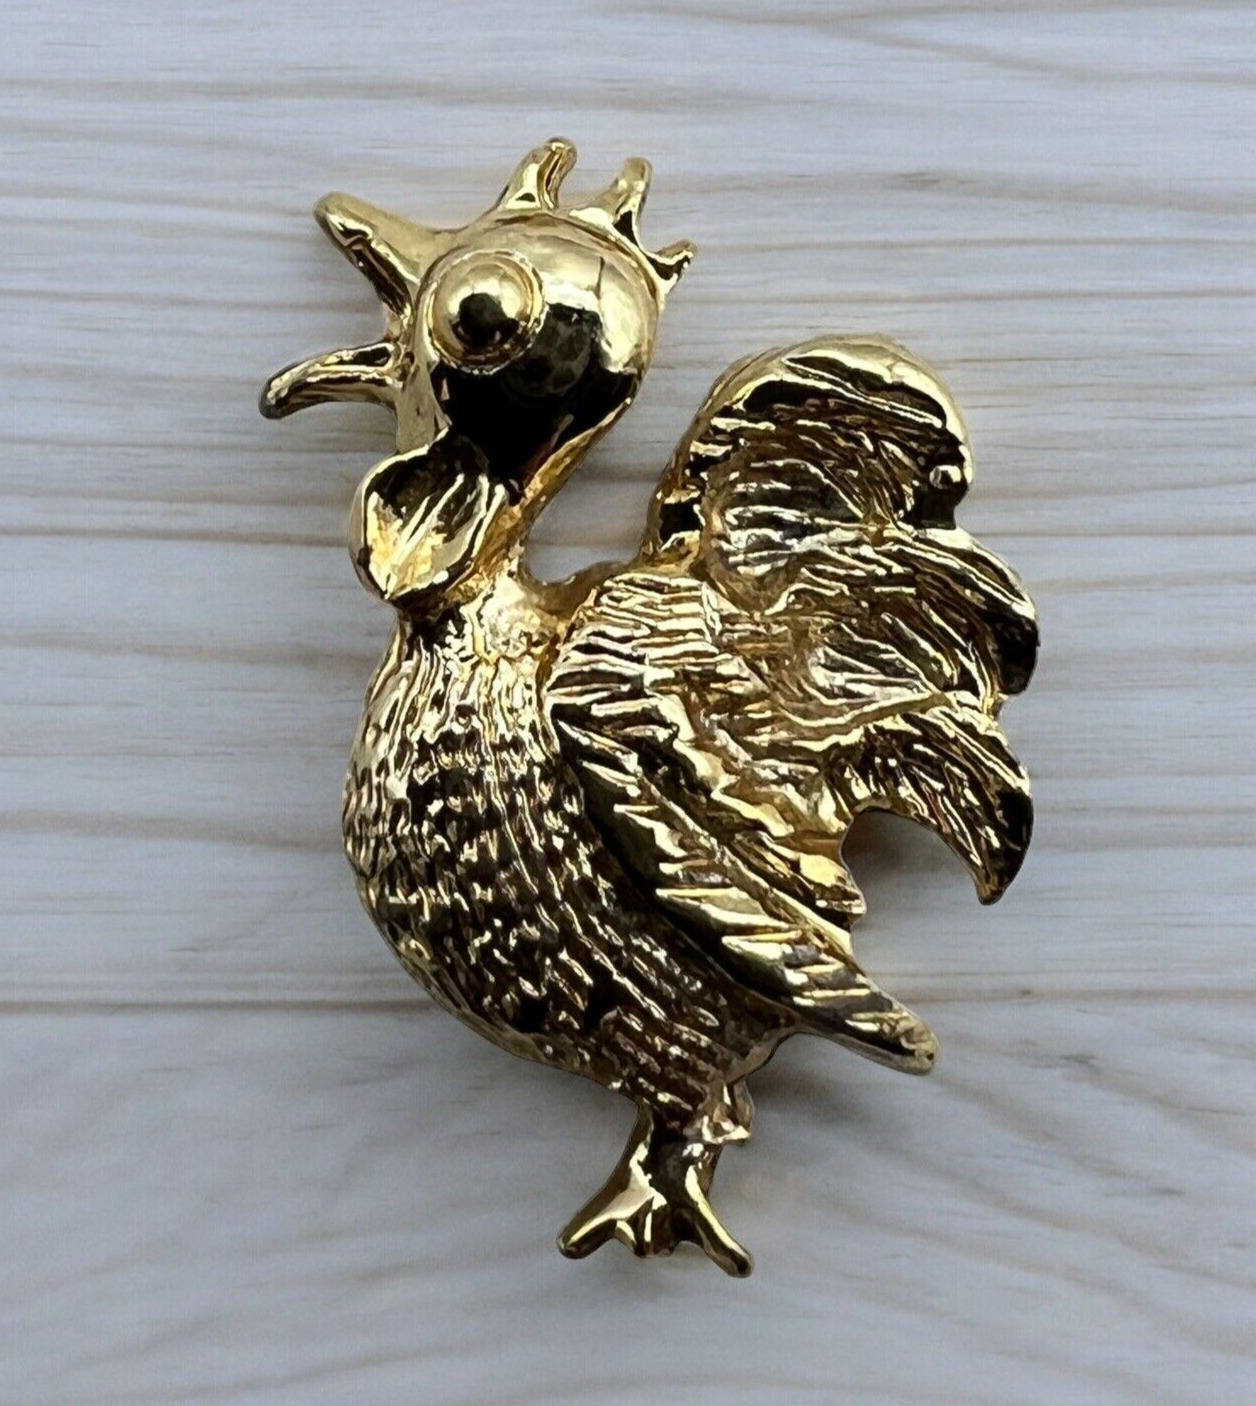 CHICKEN COUNTRY FARM ROOSTER Vintage Gold Tone Metal Lapel PIN FIGURE Figurine